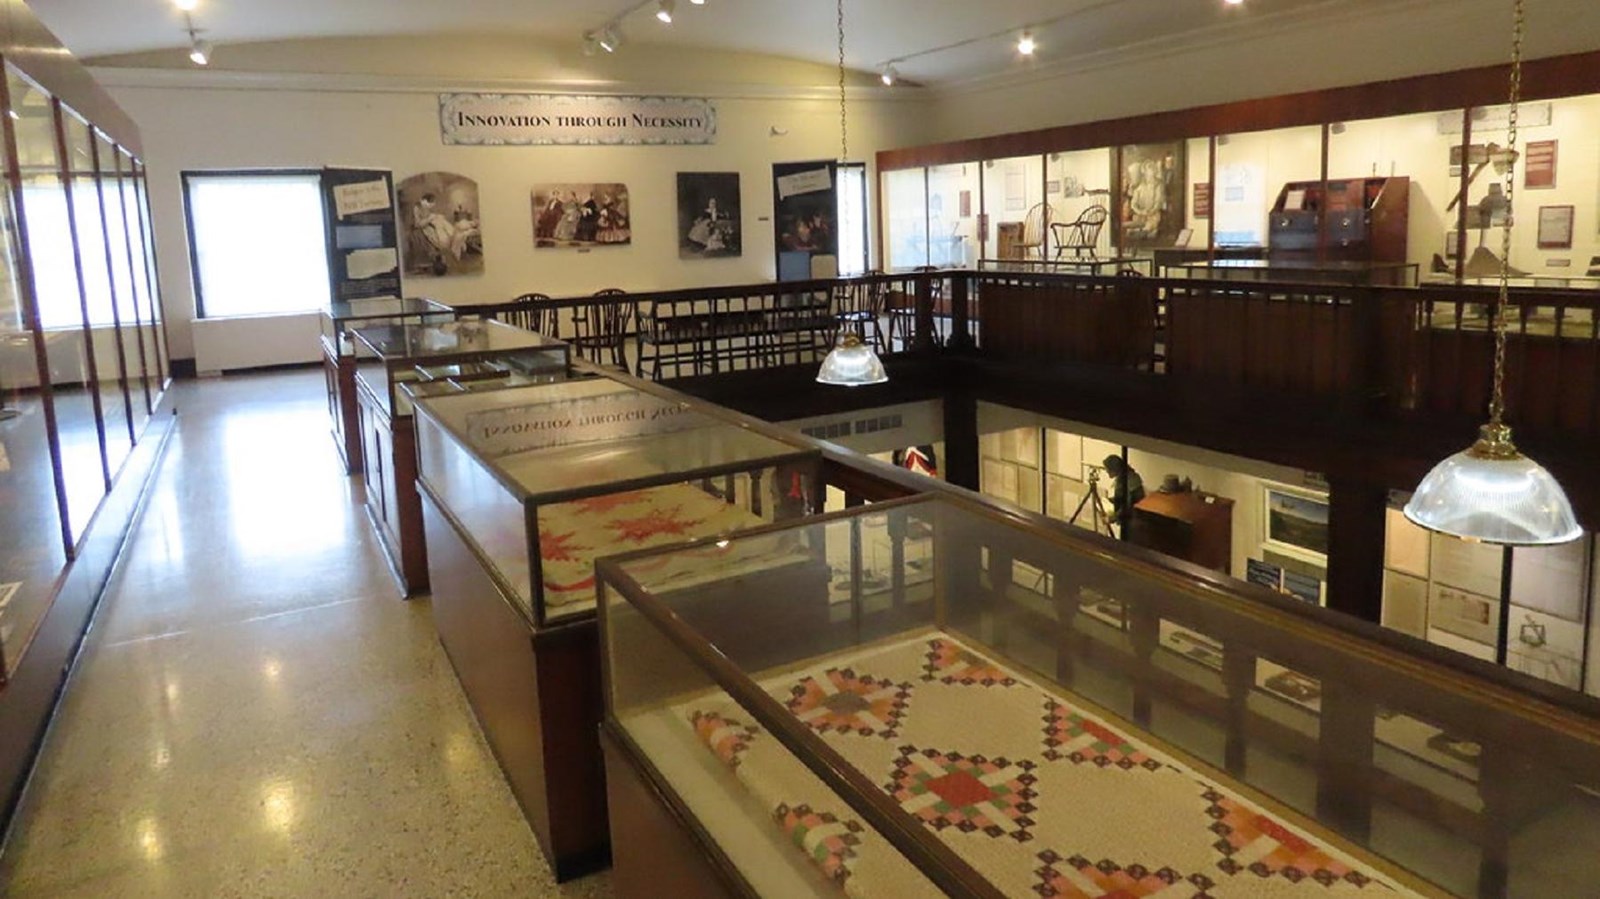 Exhibit cases on the second floor of the museum showcase quilts